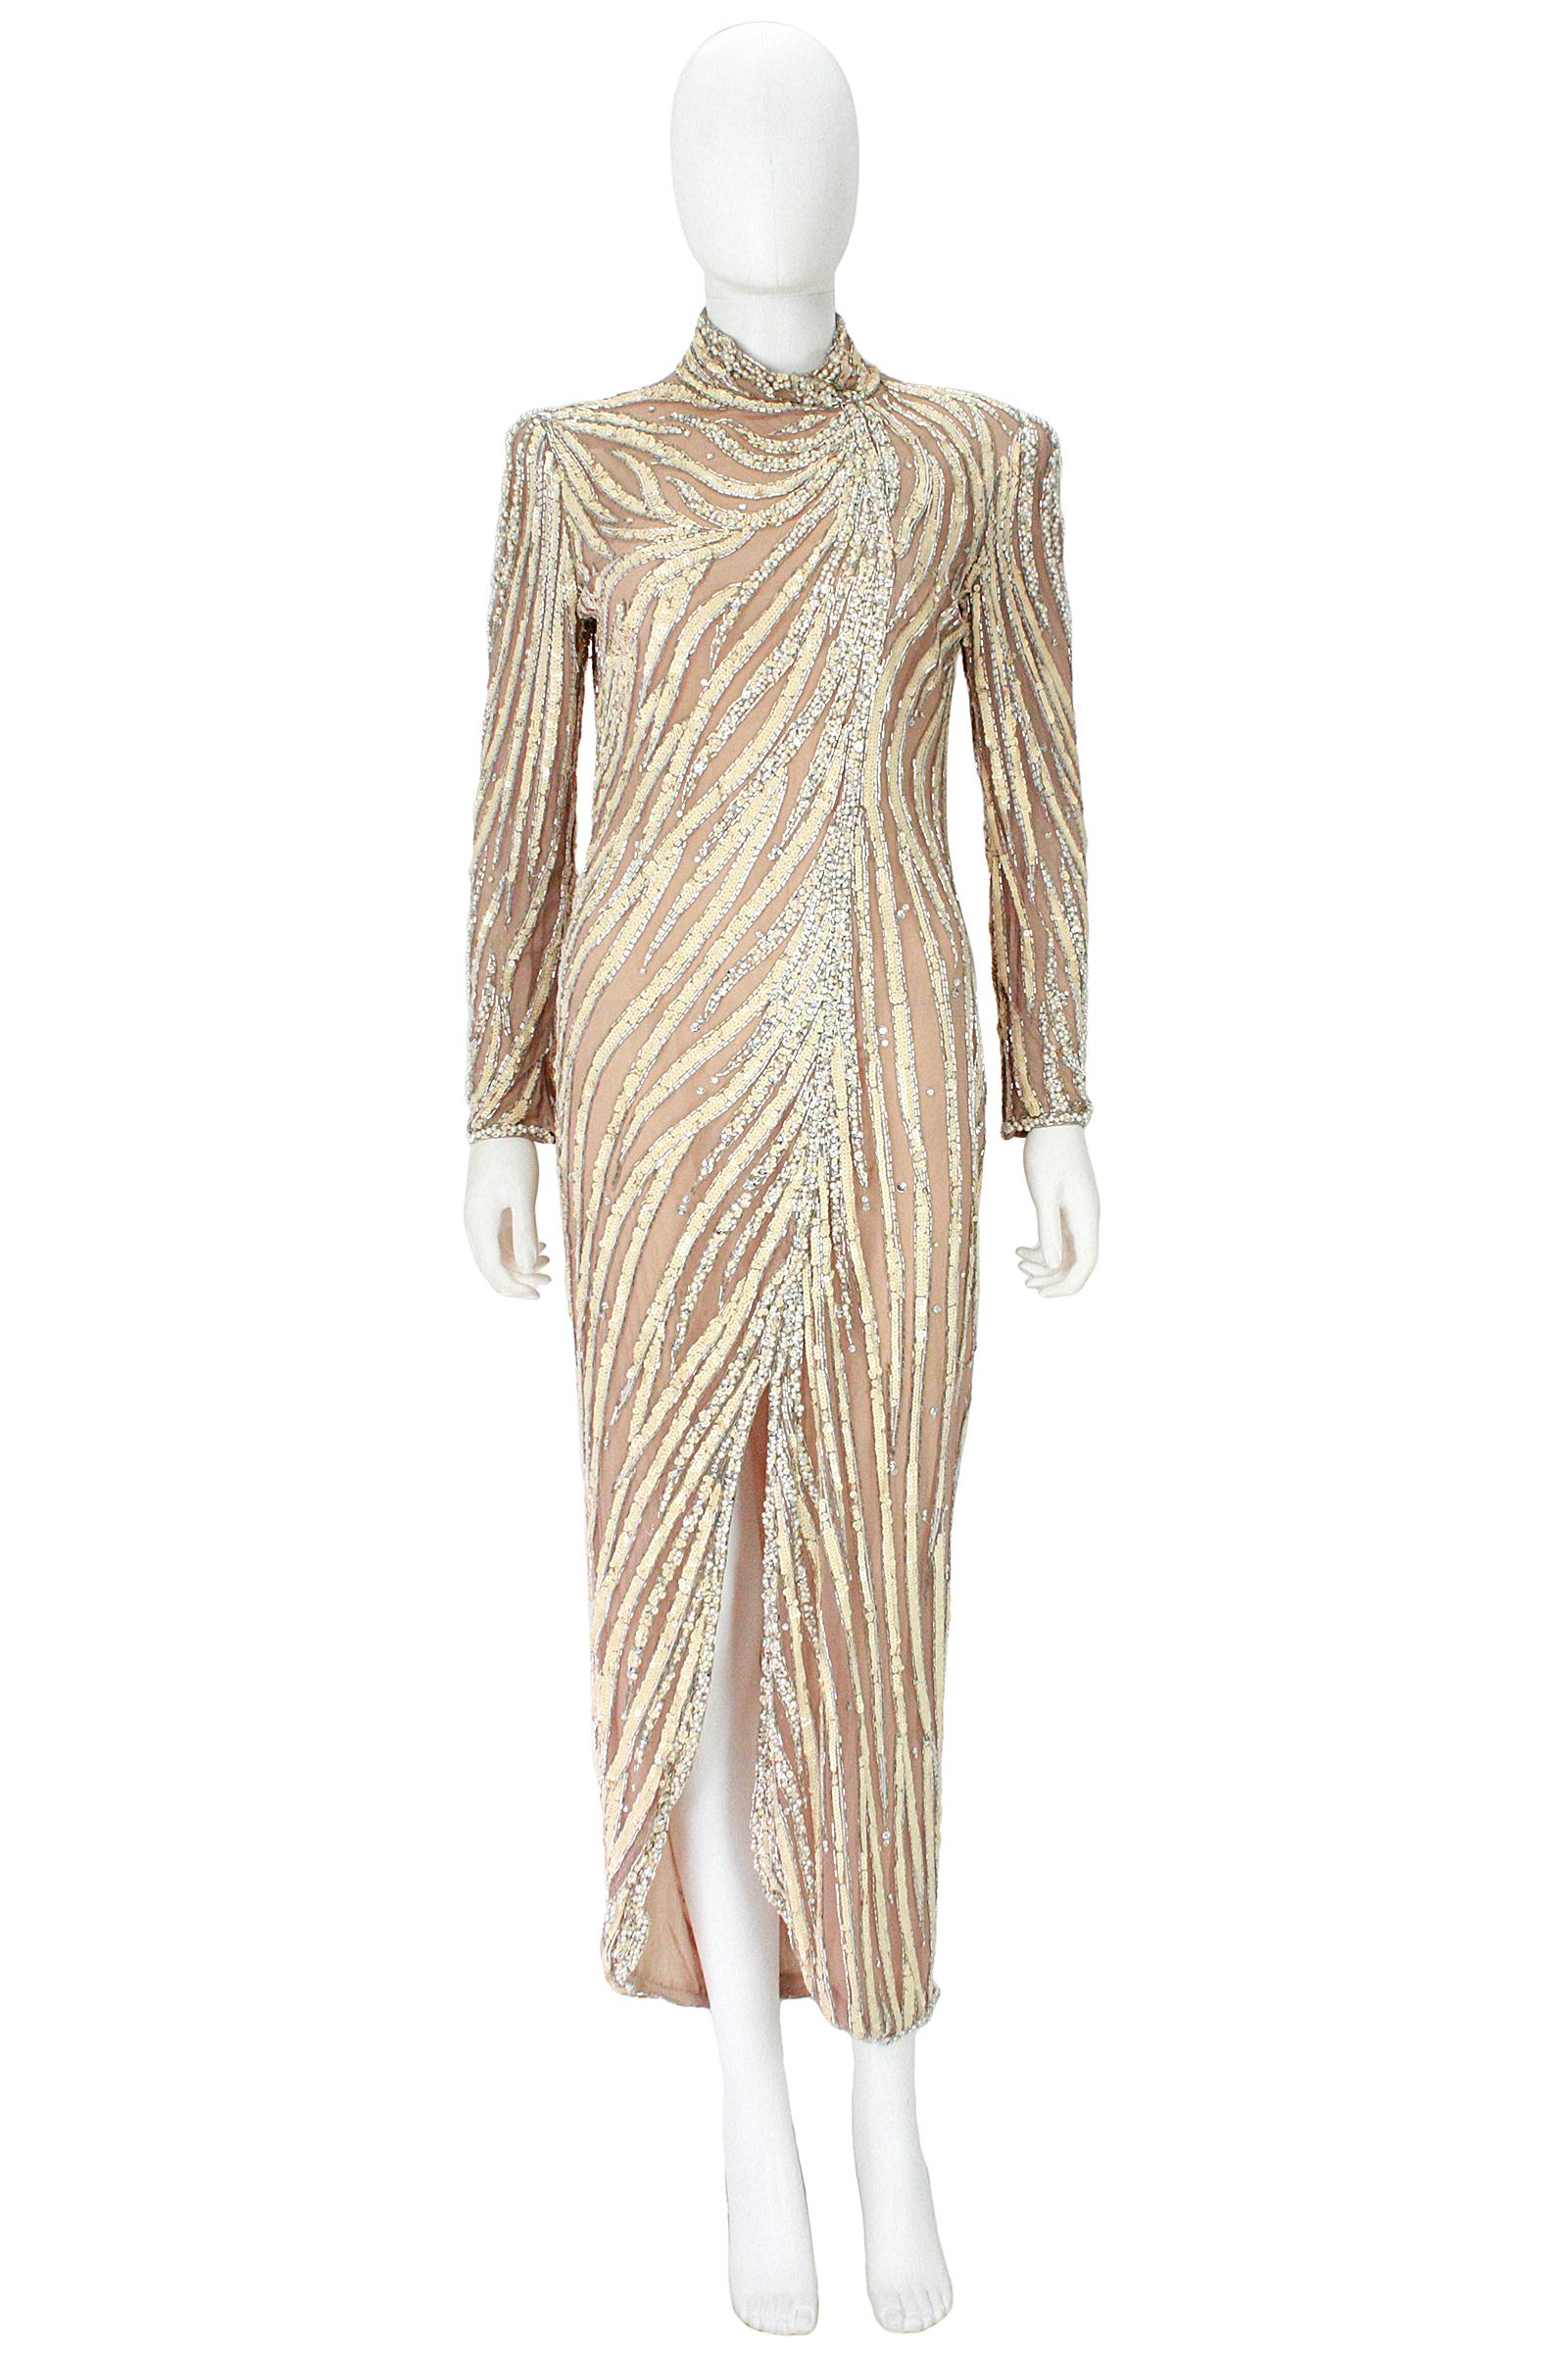 Bob Mackie gown 
Nude silk beaded and sequined 
Front slit 
Back zipper and zippers at the sleeve 
Gown marked size 12, however it frits more like an 8-10
Fully lined 
Lining has some discolorations from perspiration and stage makeup.
Lining issues